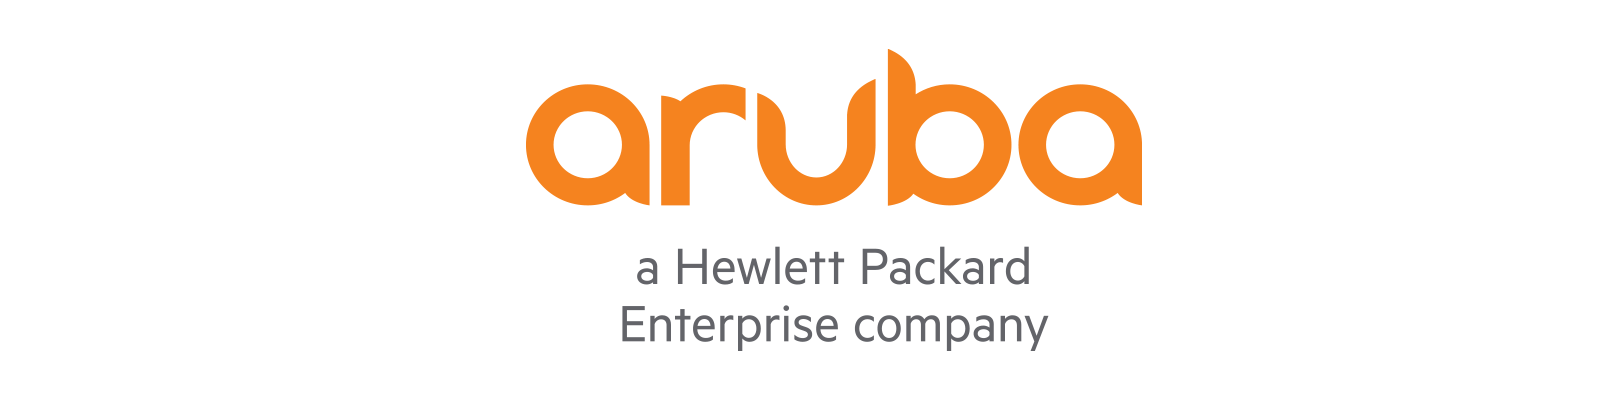 HP Services Logo - Aruba | Enterprise Networking and Security Solutions